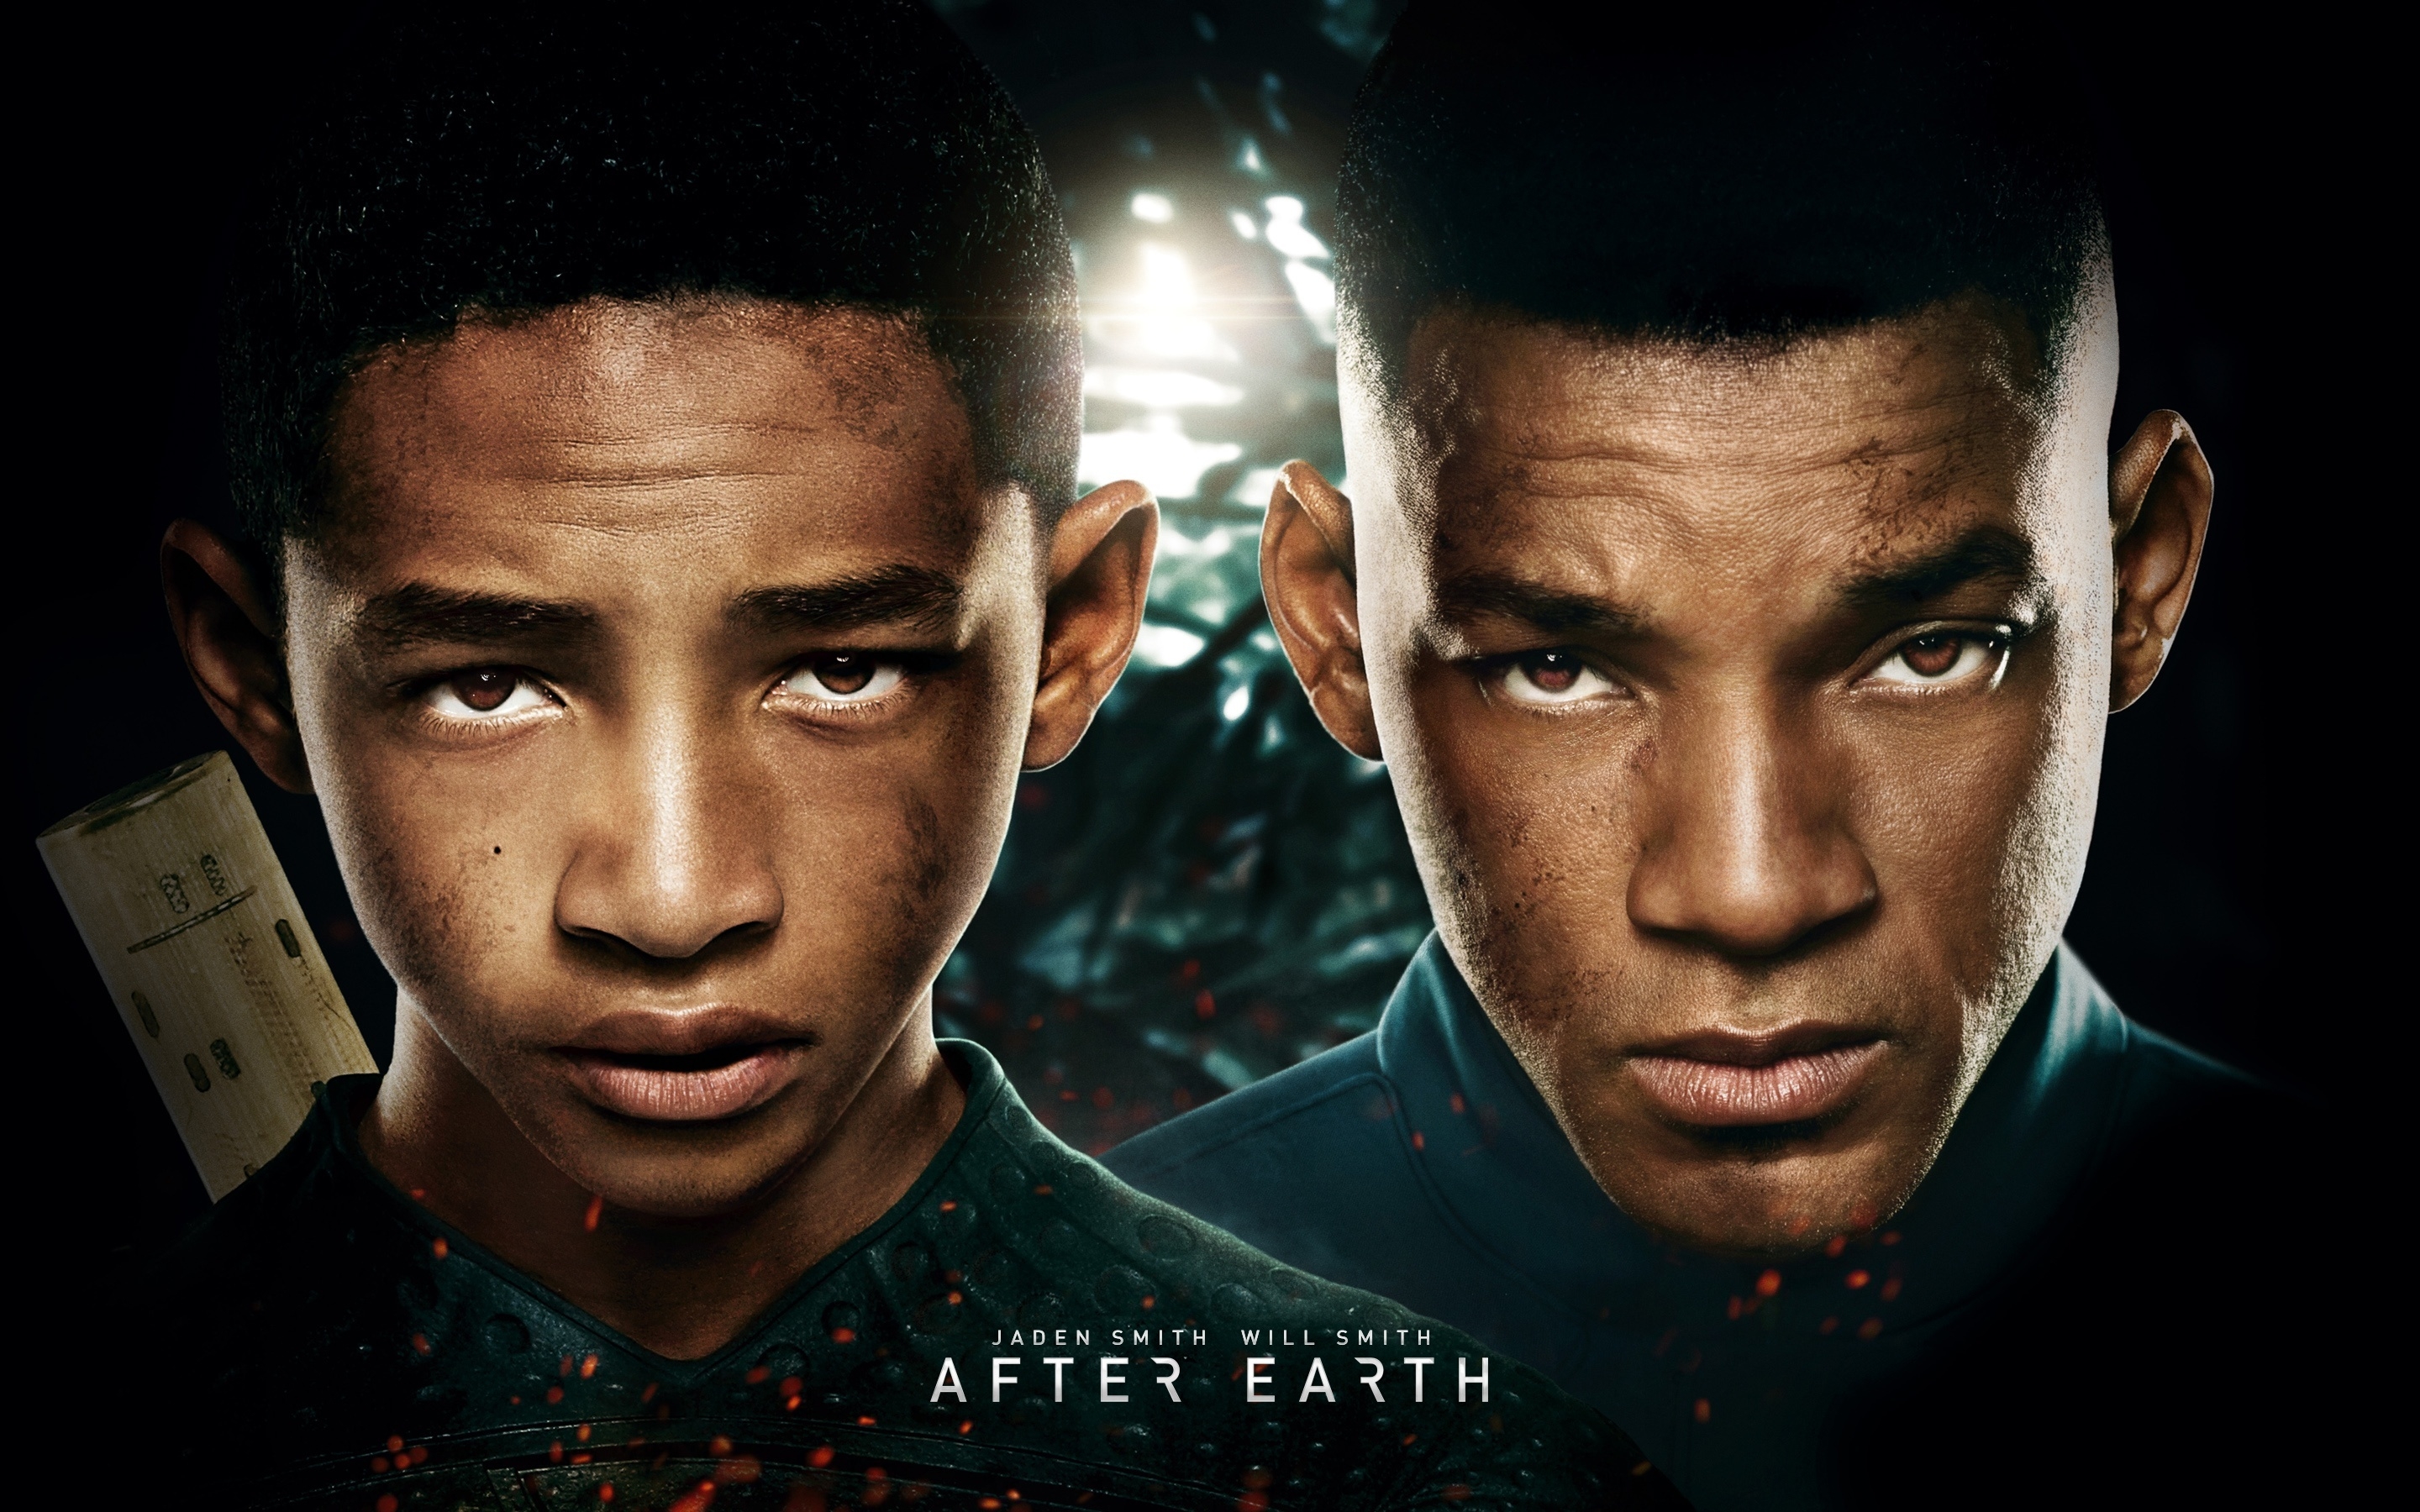 After Earth 2013 Movie for 2880 x 1800 Retina Display resolution